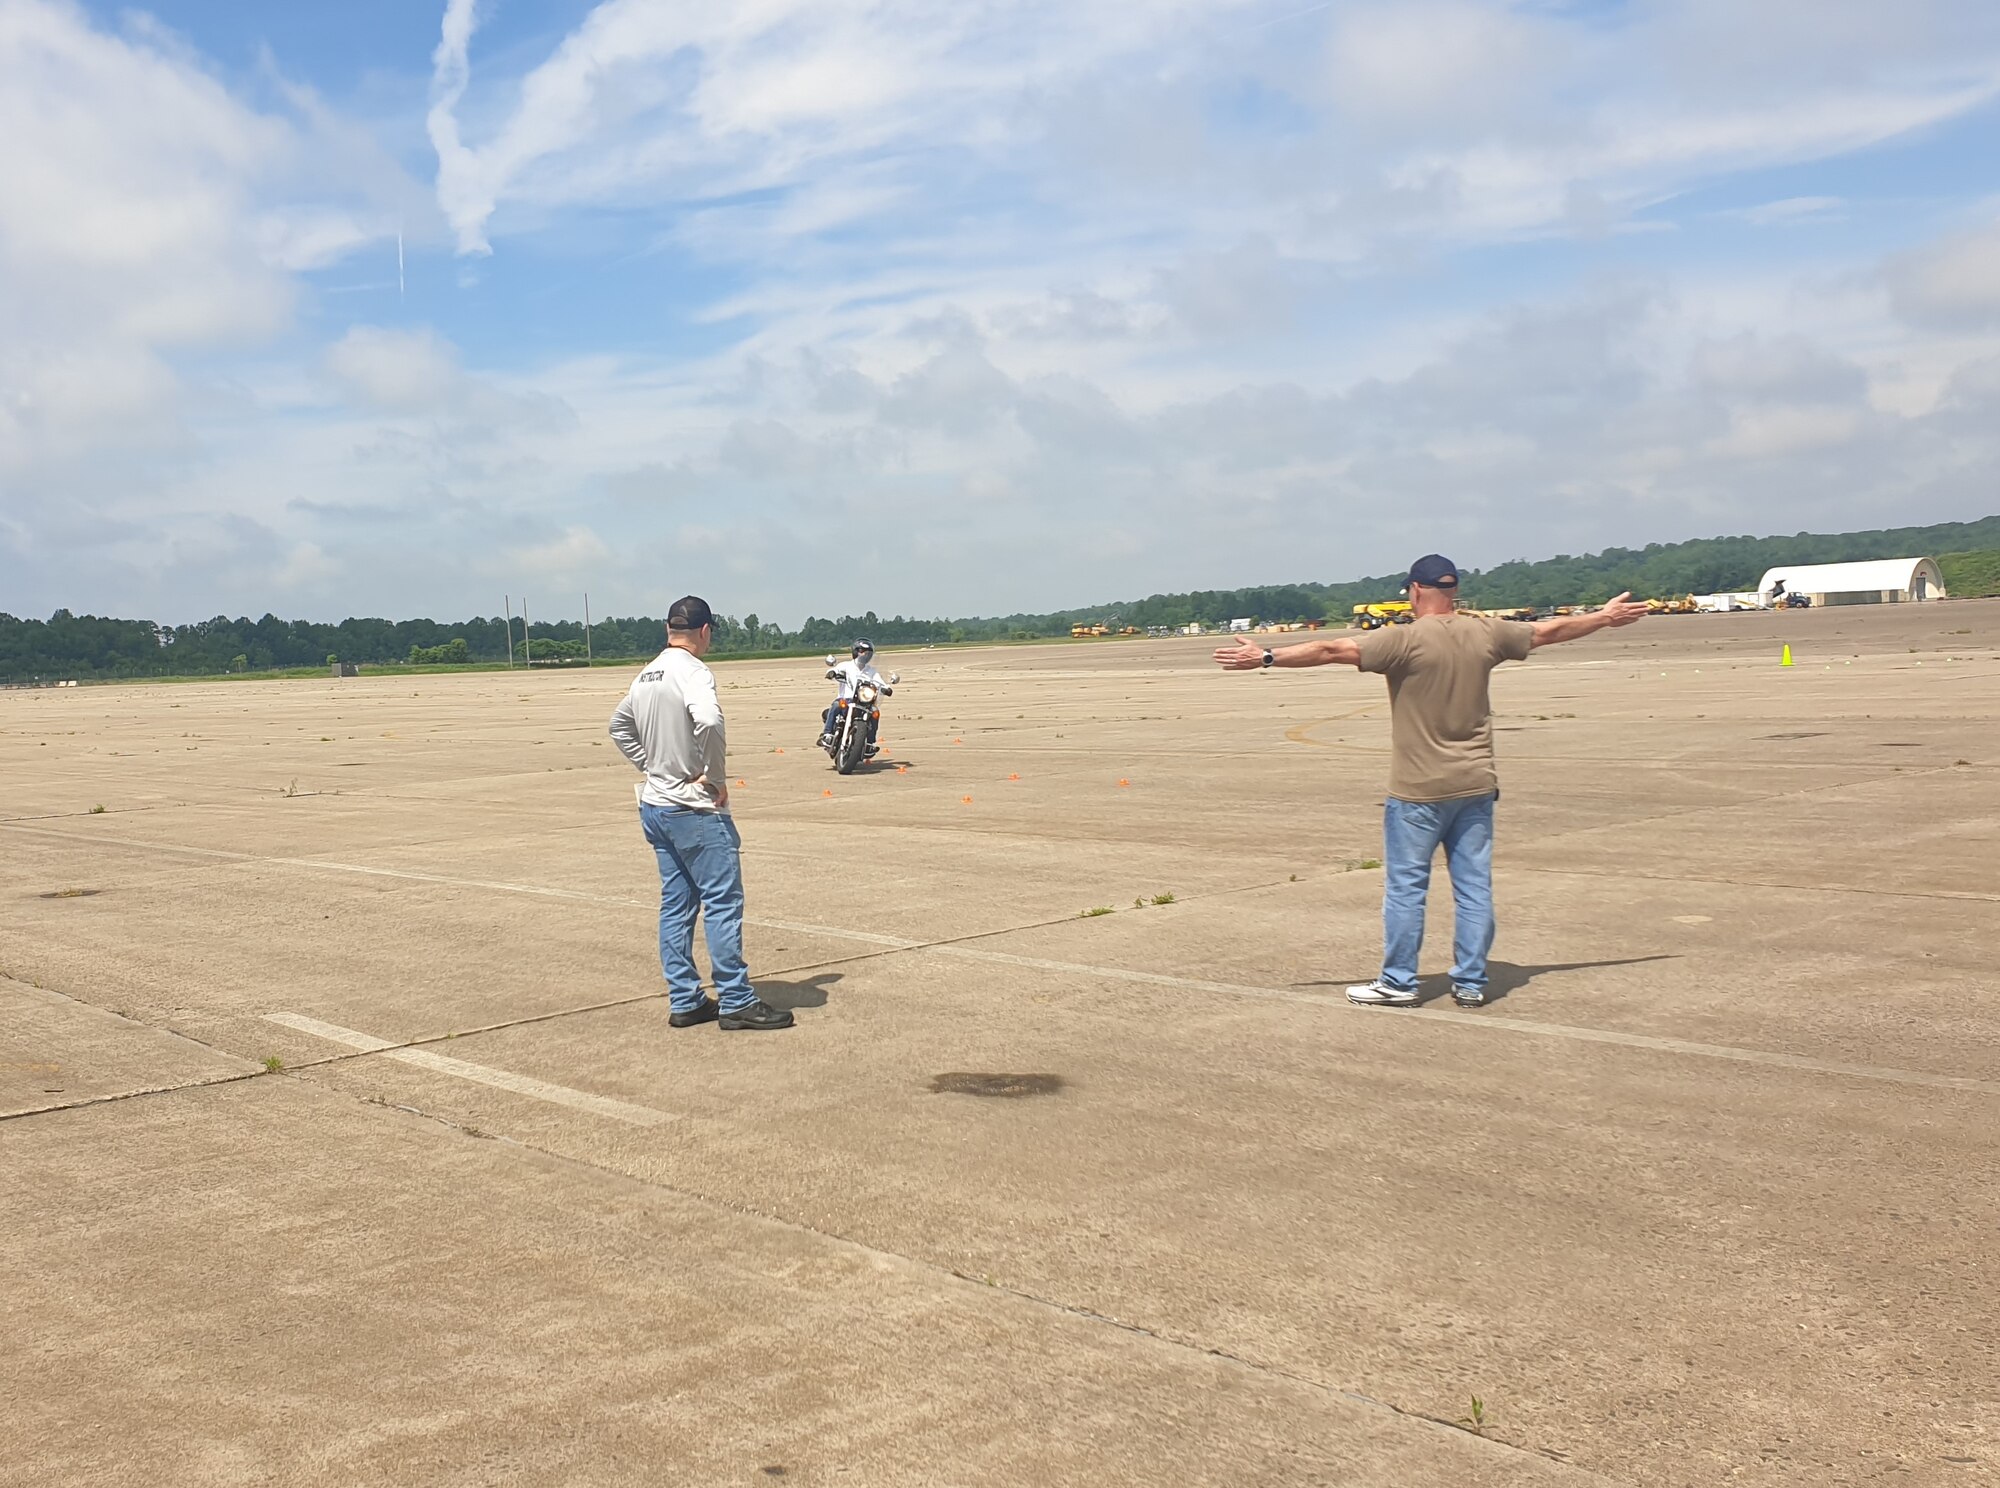 Two men facing a man riding a motorcycle on an airfield.